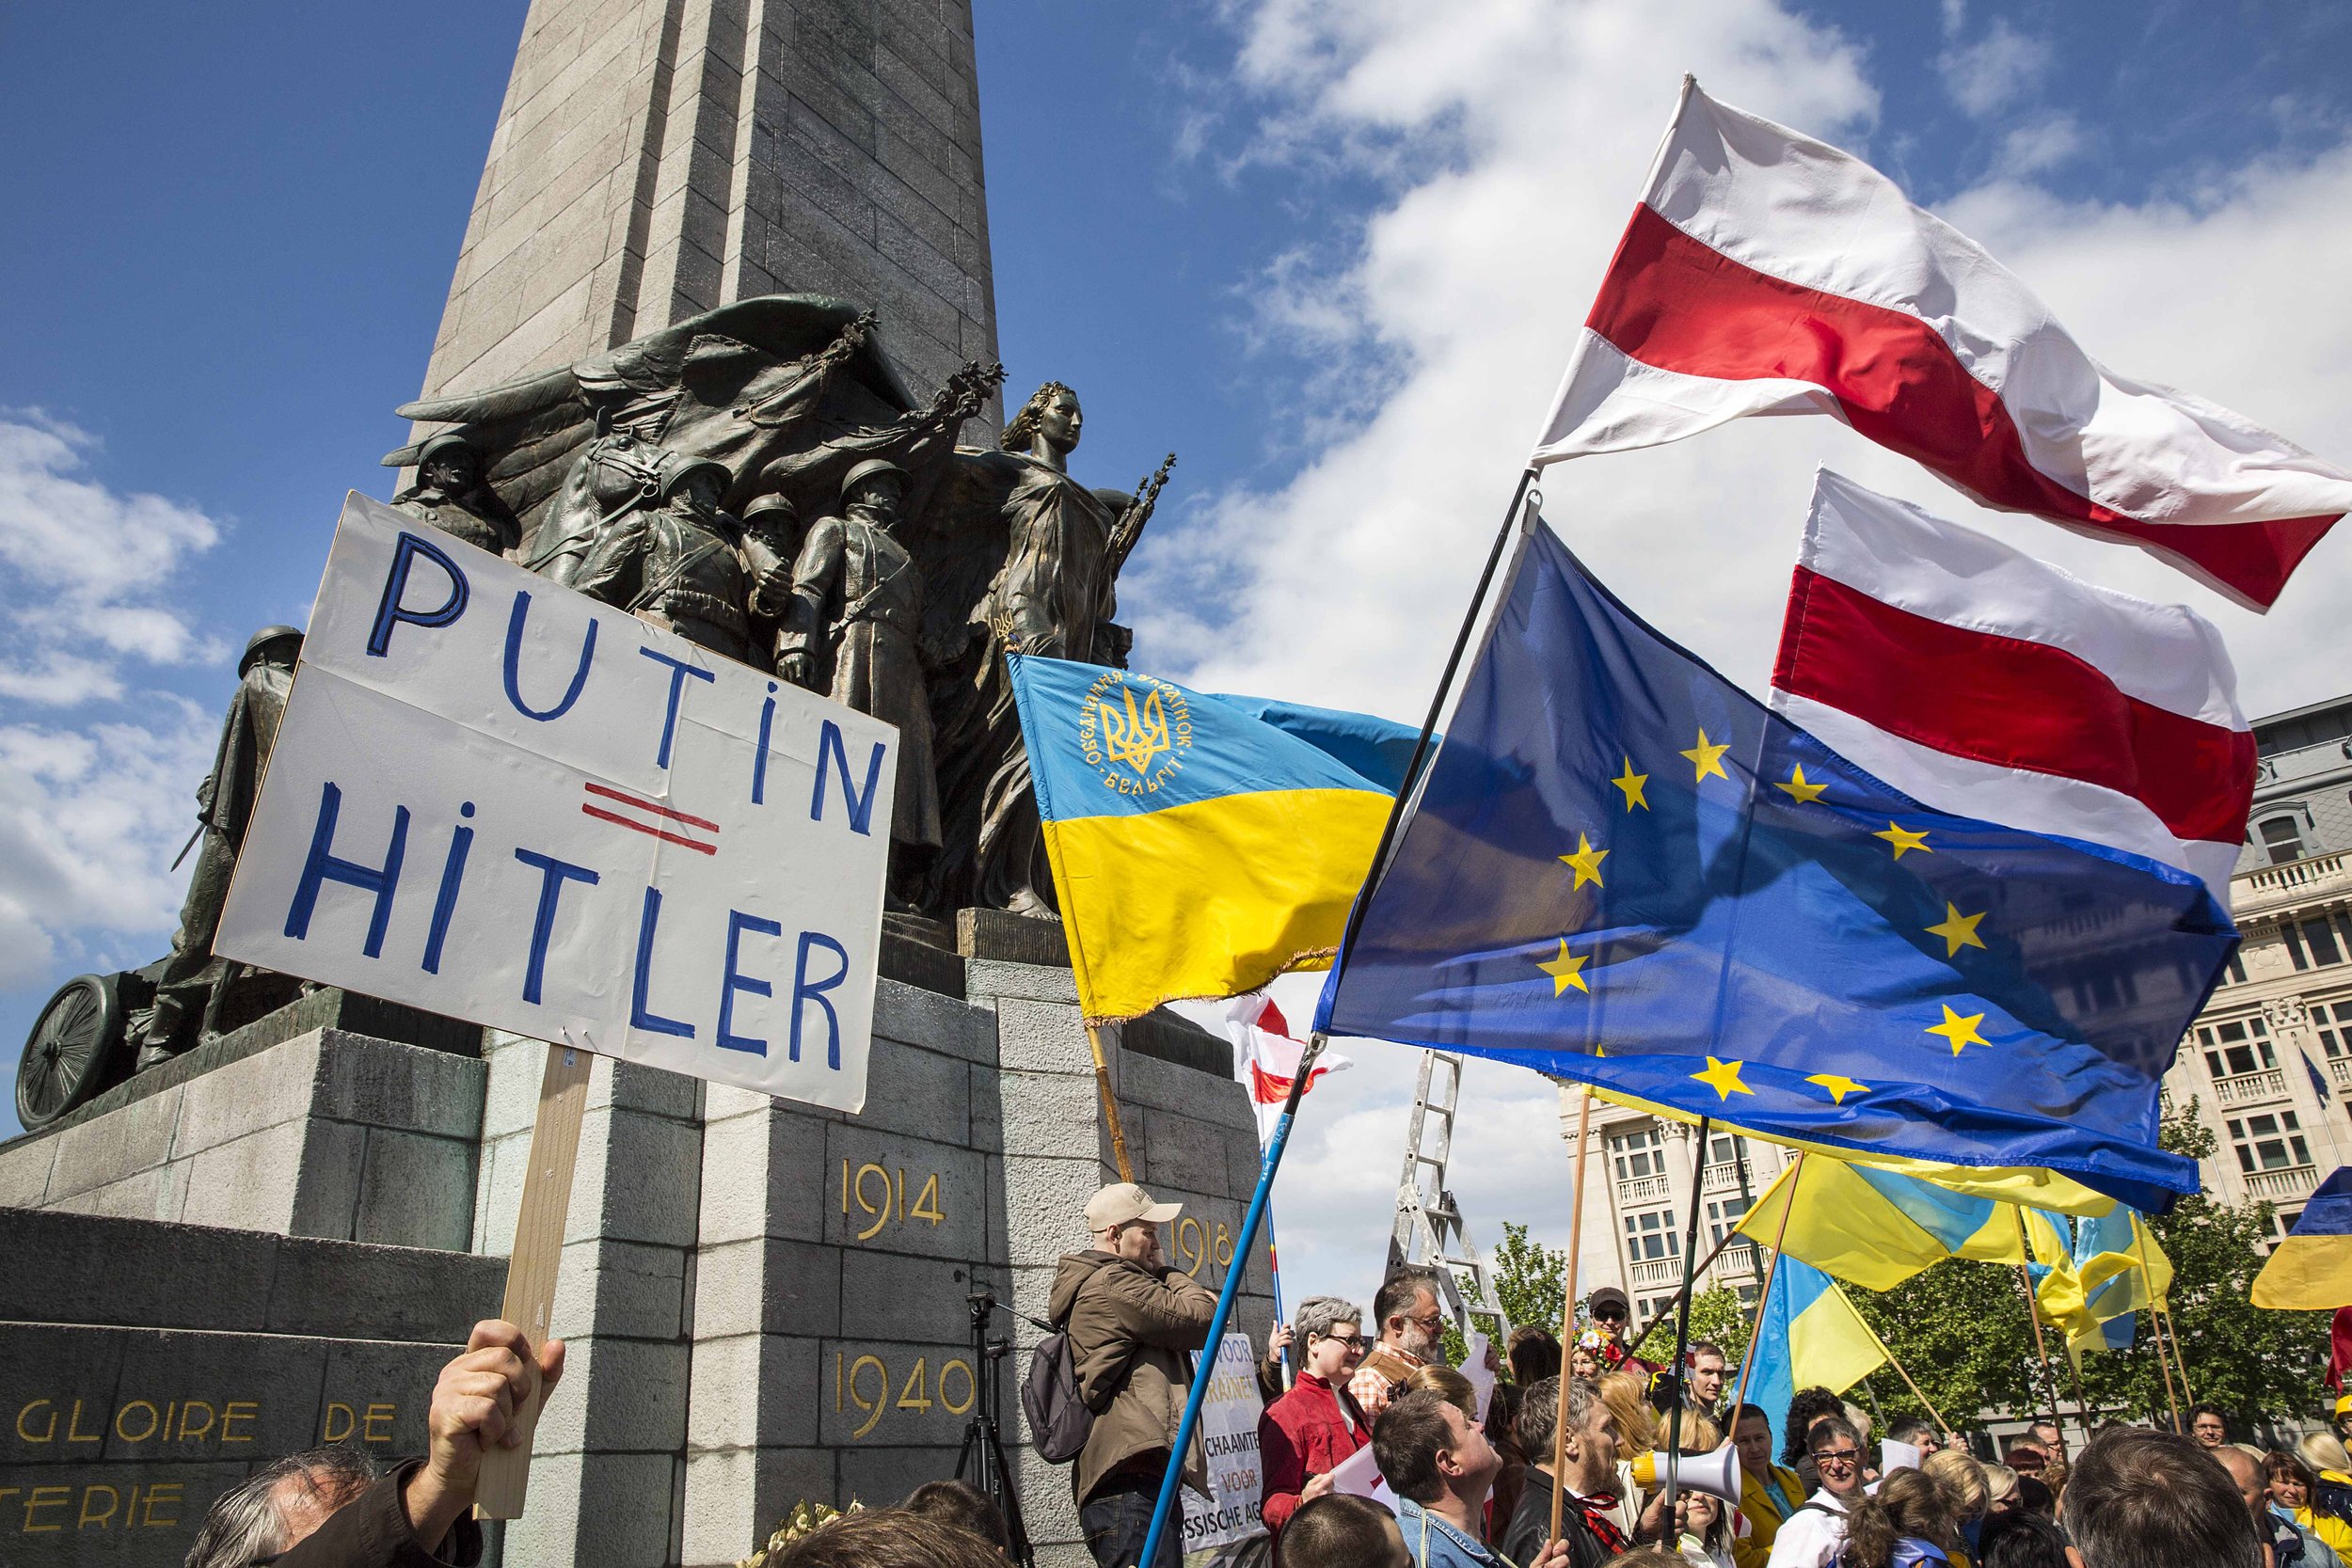  Ucraninians living in Brussels demonstrate against start the war in their country by Russia and joined together the hands till make a circle with the historic symbol Make Peace and Not War, today Saturday, May 3, 2014 in Brussels.  